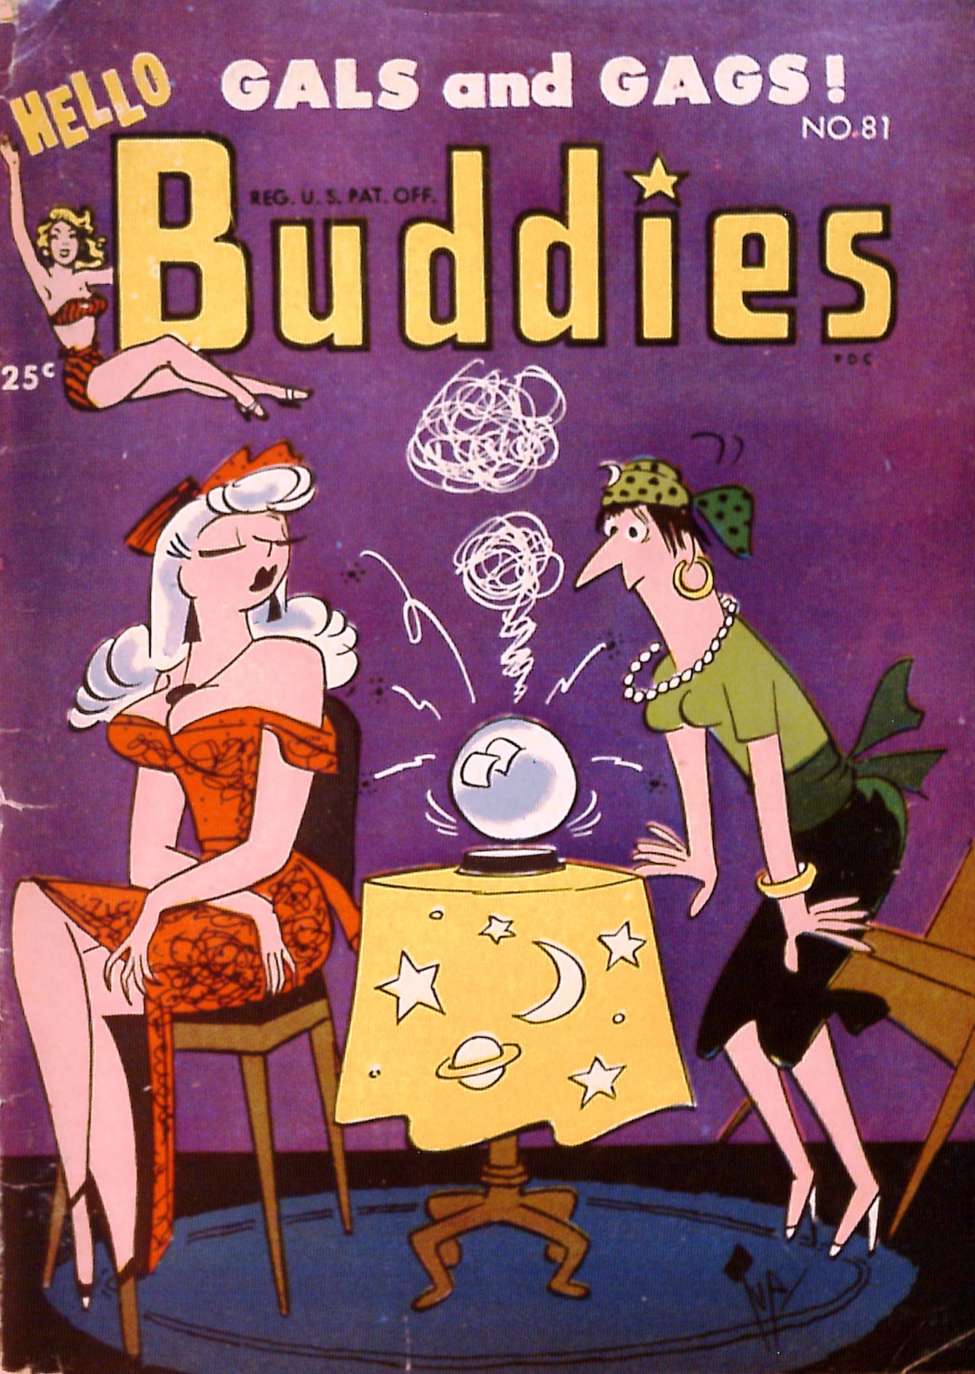 Book Cover For Hello Buddies 81